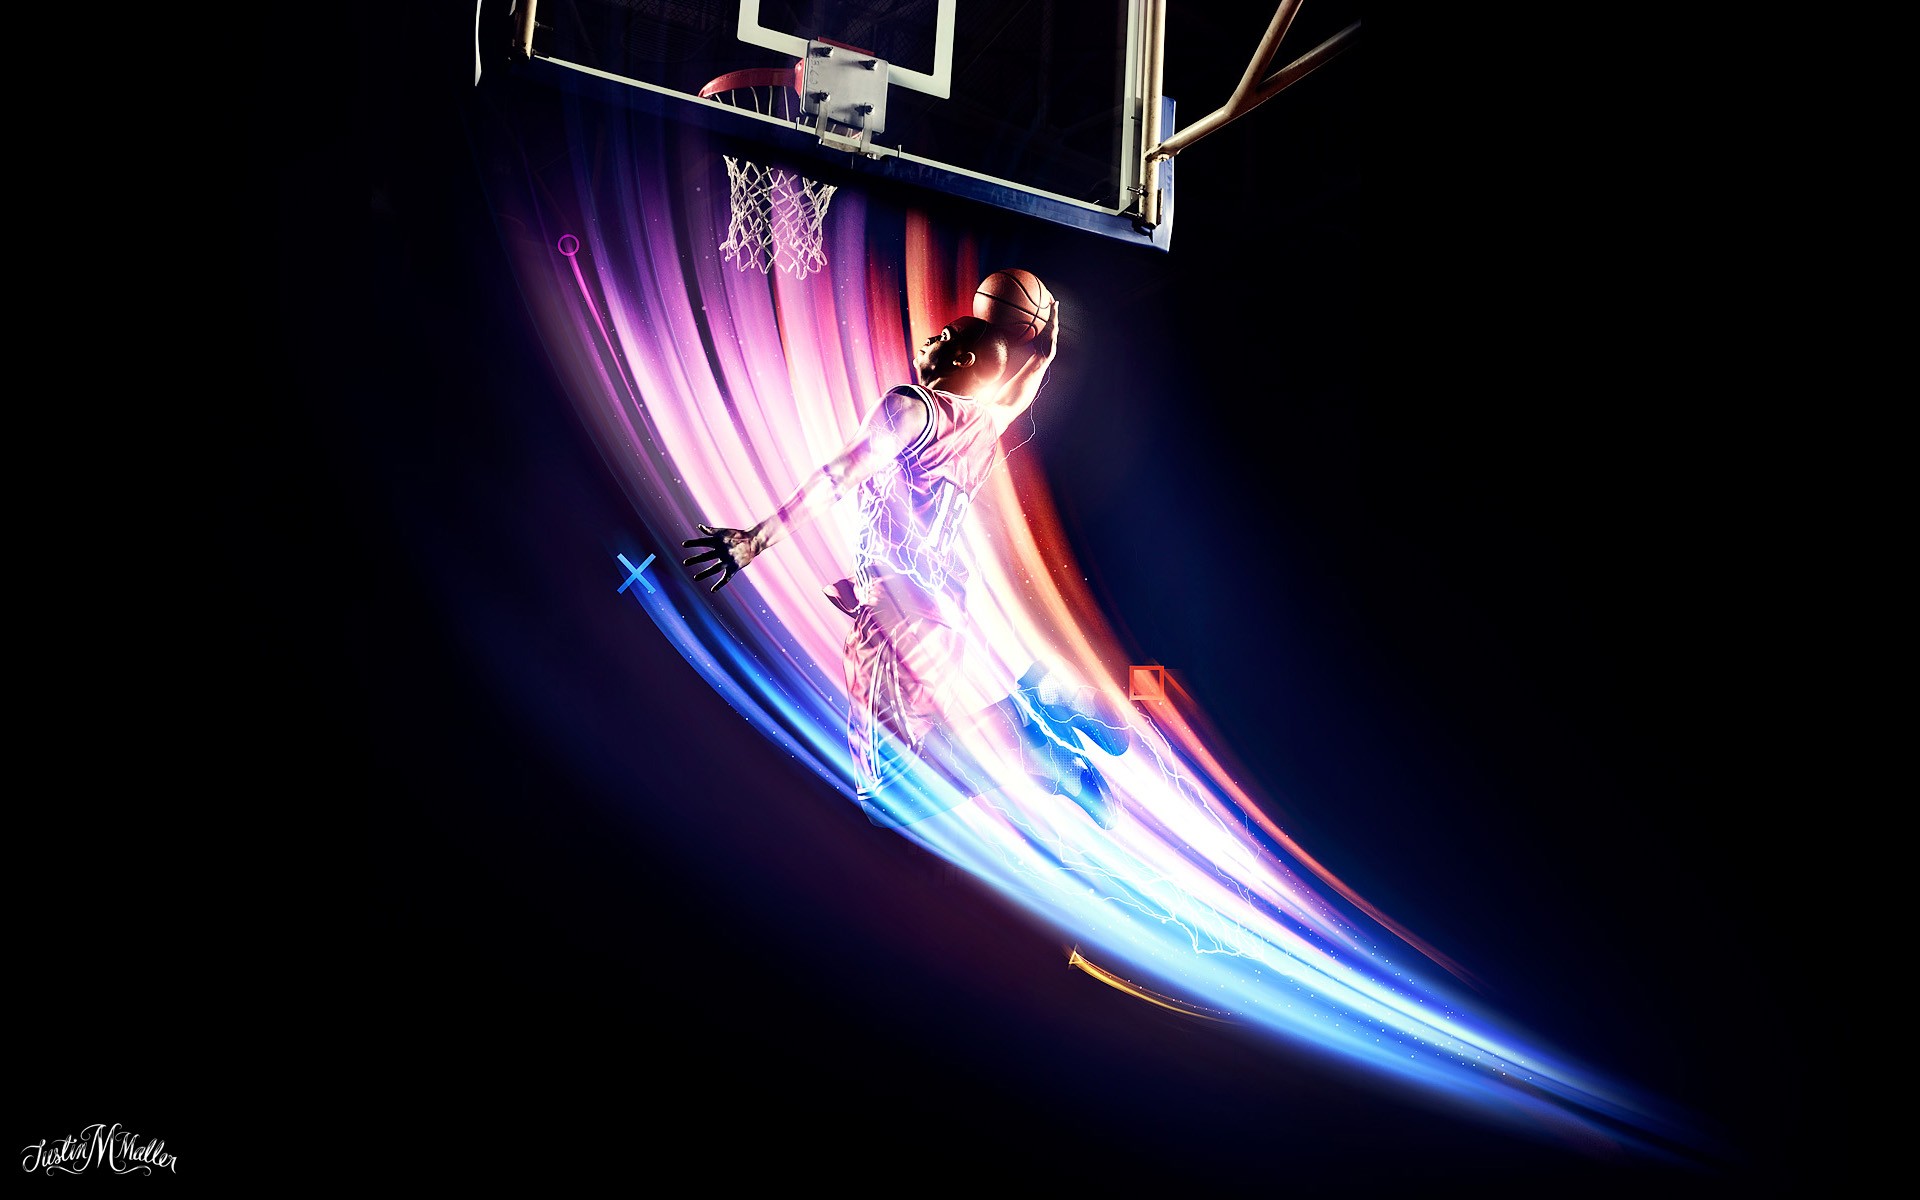 Wallpaper, sports, night, neon, space, circle, basketball, NBA, laser, light, color, lighting, shape, flame, darkness, 1920x1200 px, computer wallpaper, atmosphere of earth 1920x1200